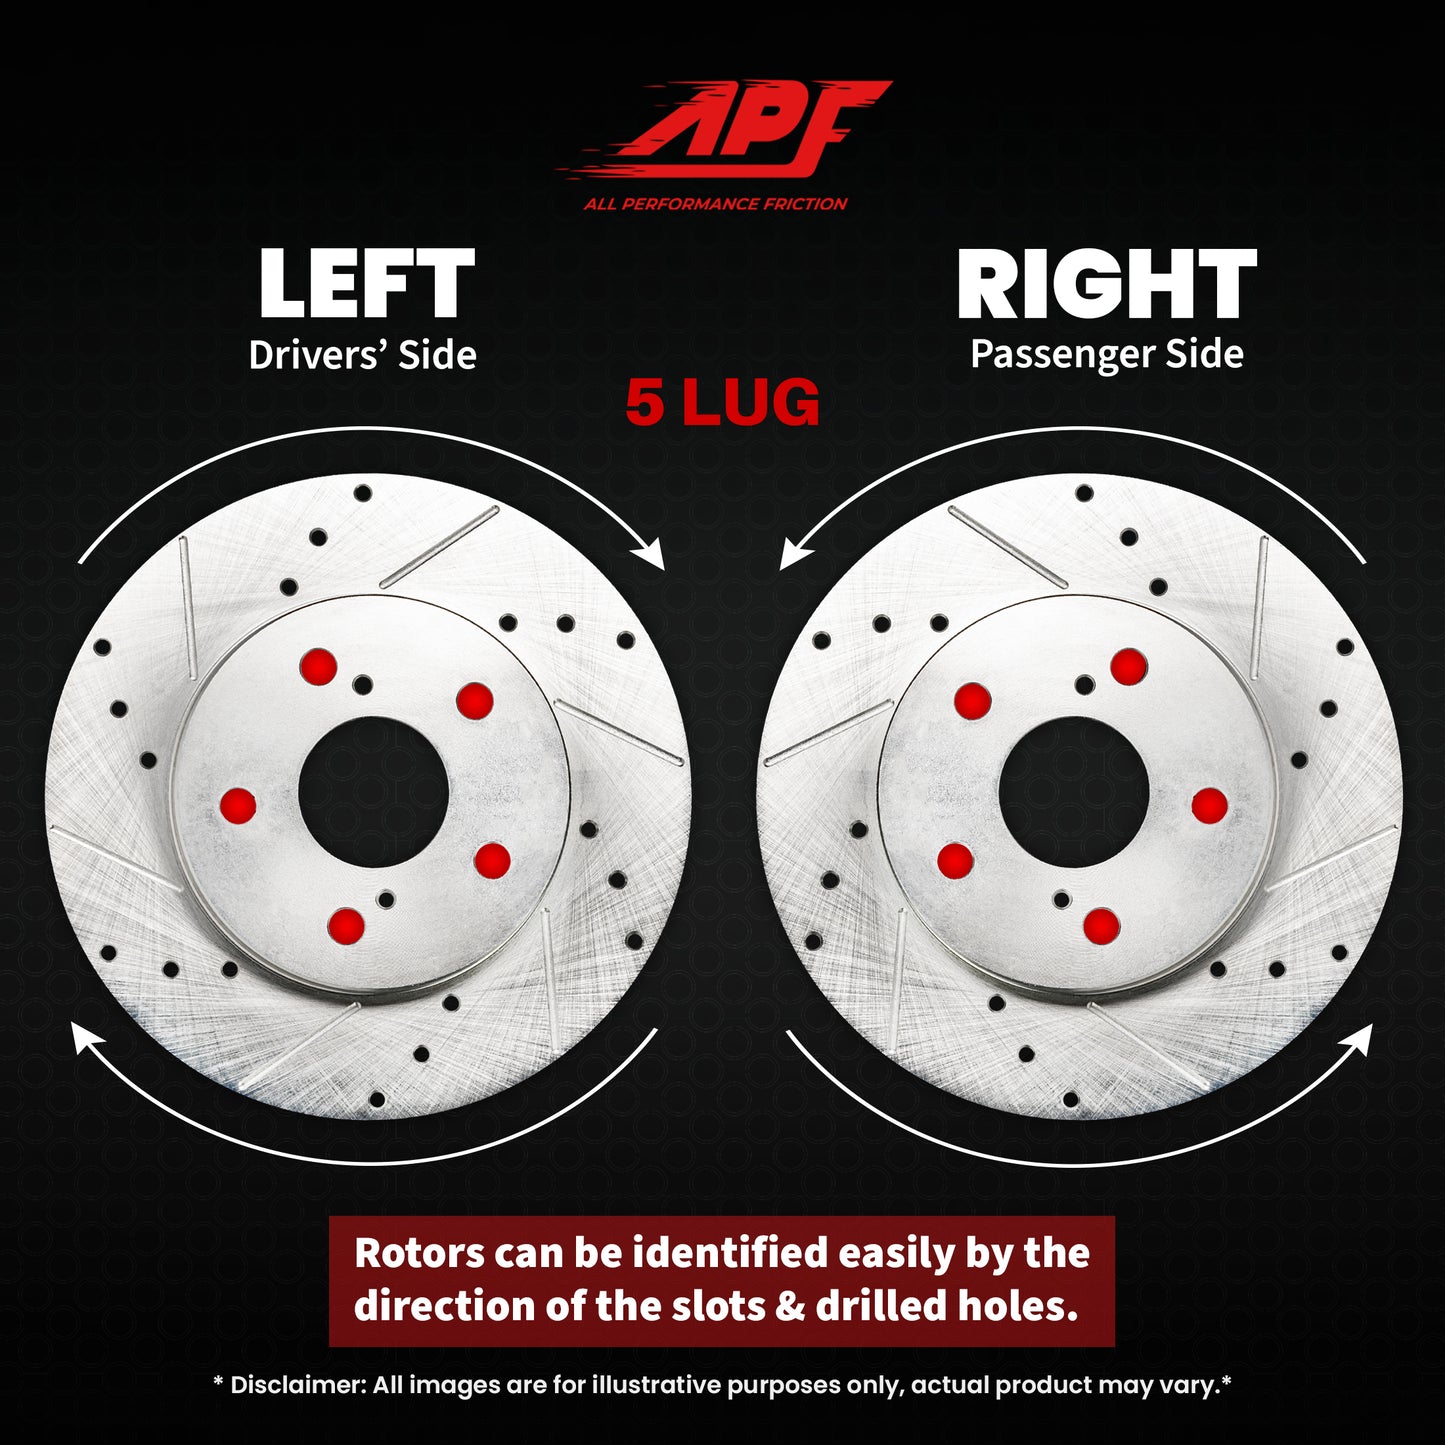 APF All Performance Friction Front Rotors compatible with Ford Taurus 2013-2019 Zinc Drilled Slotted Rotors | $229.78